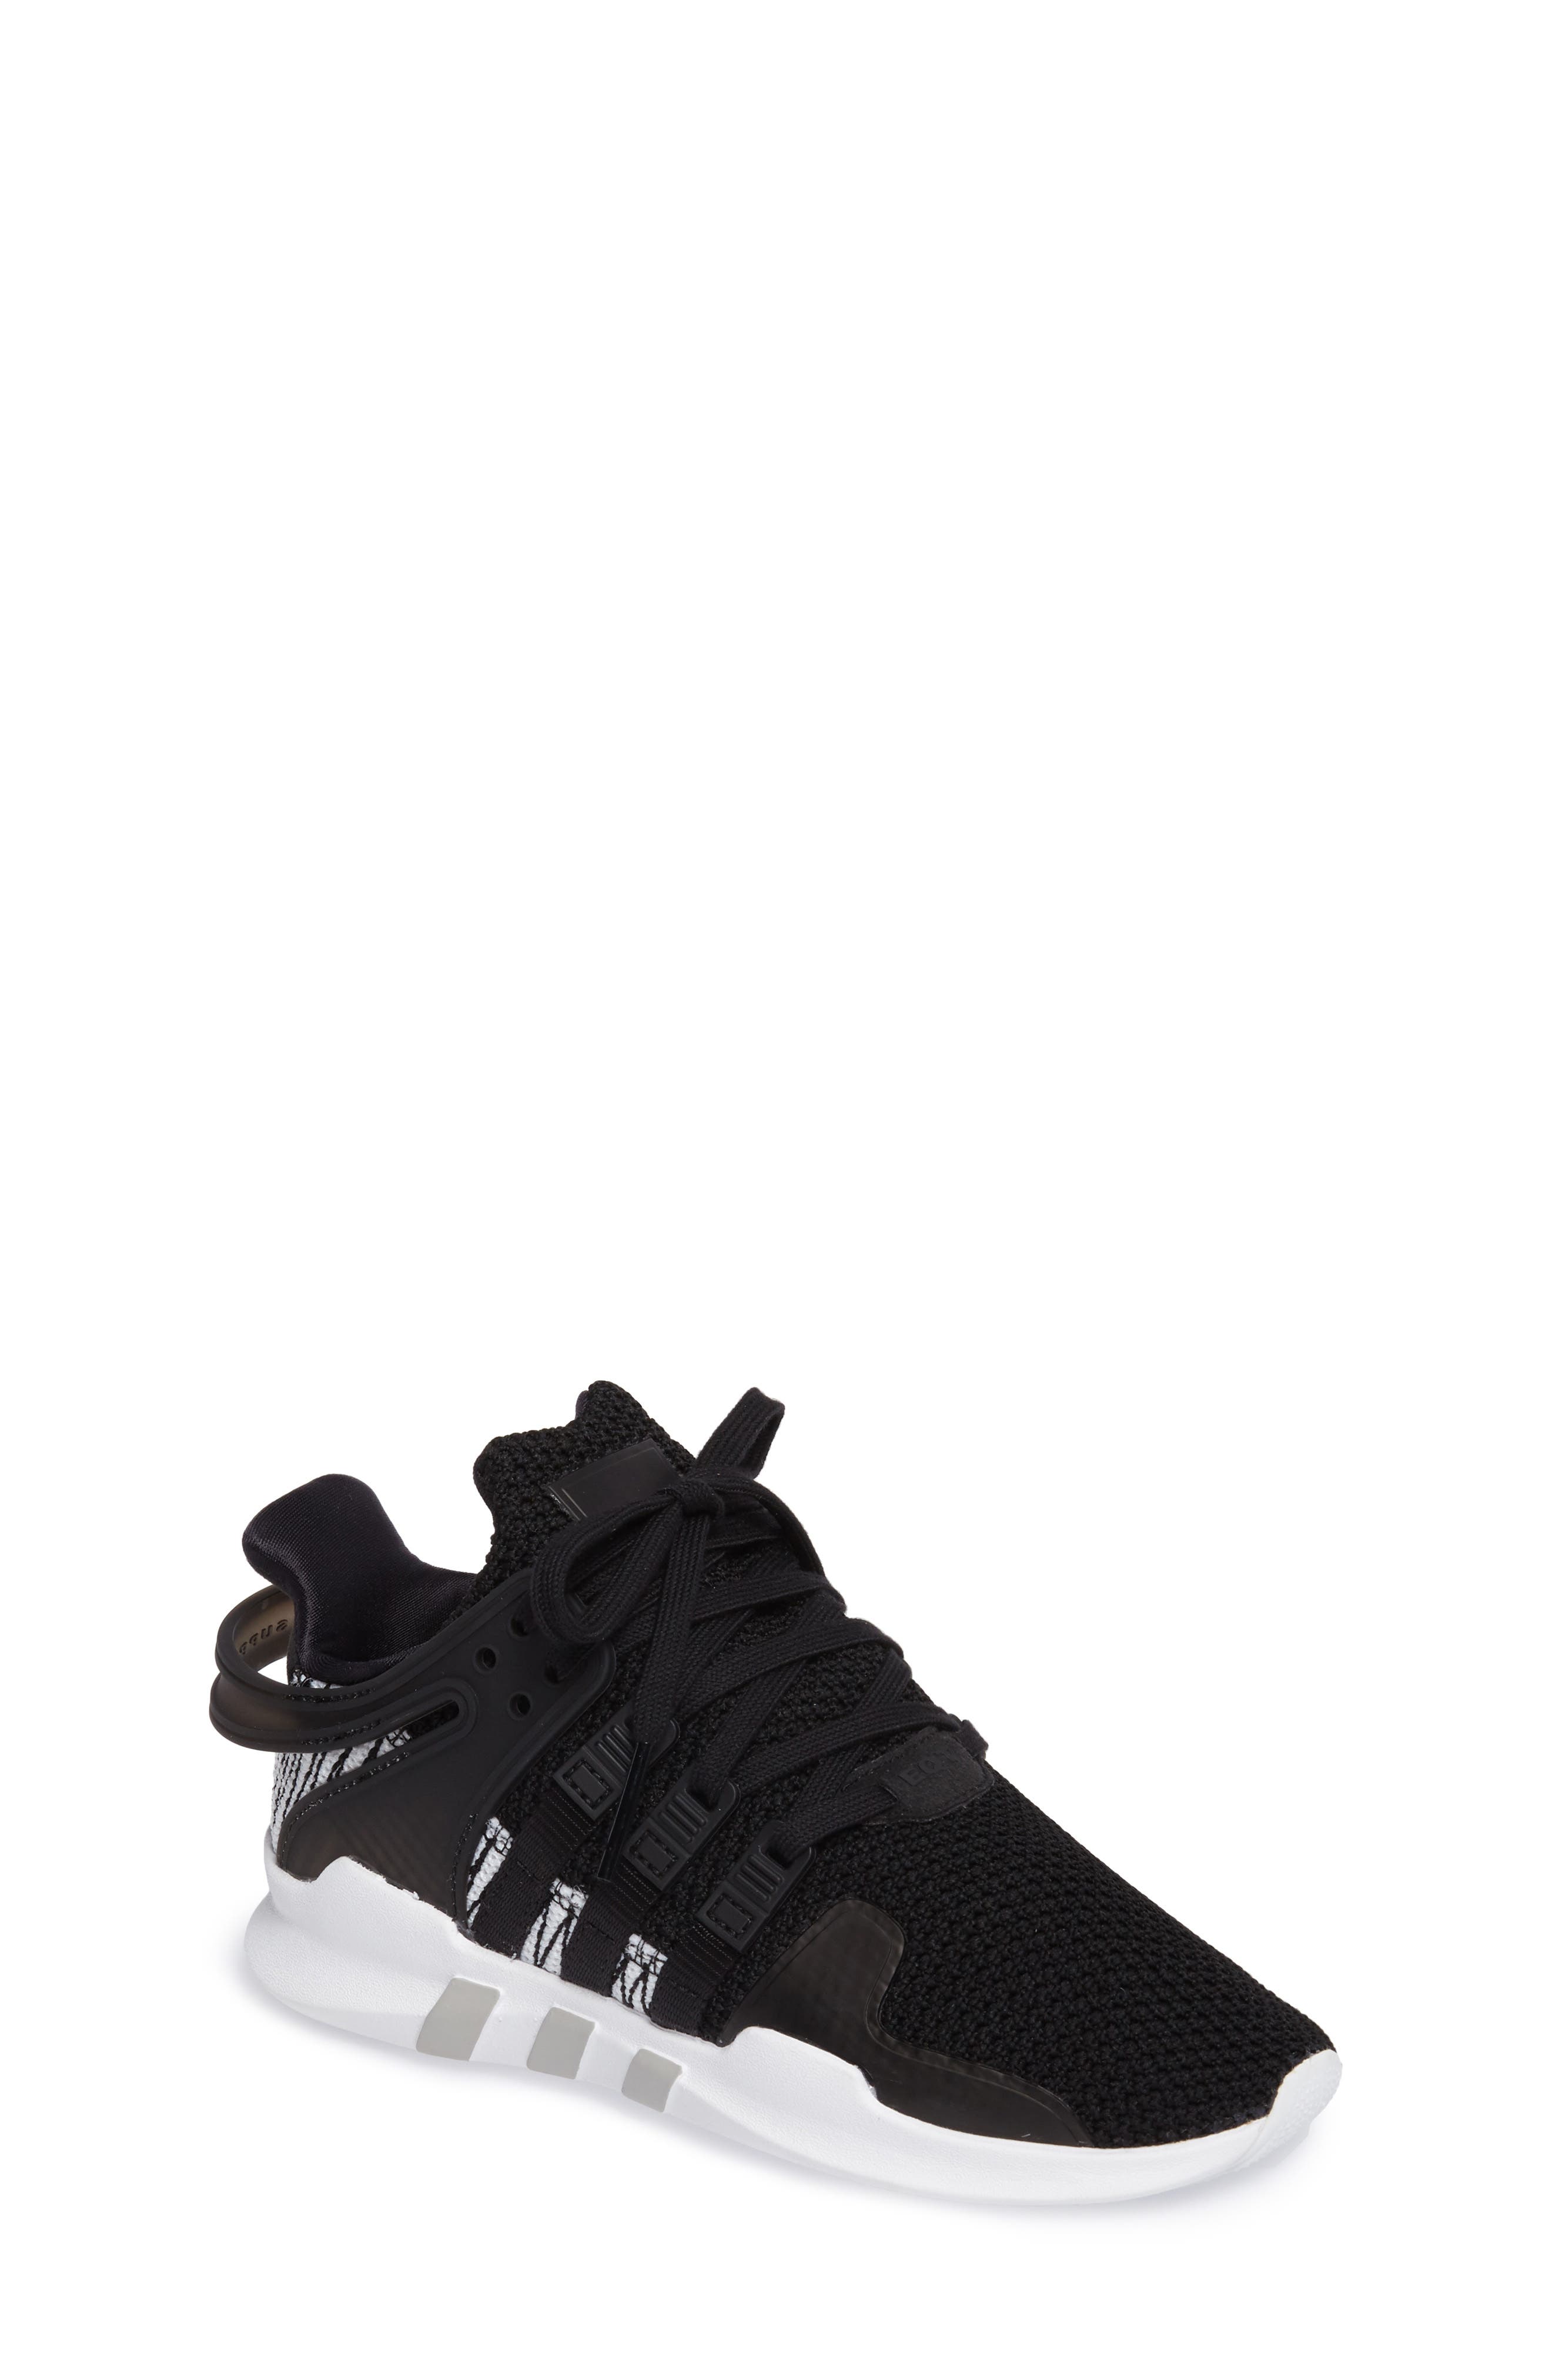 adidas eqt for kids